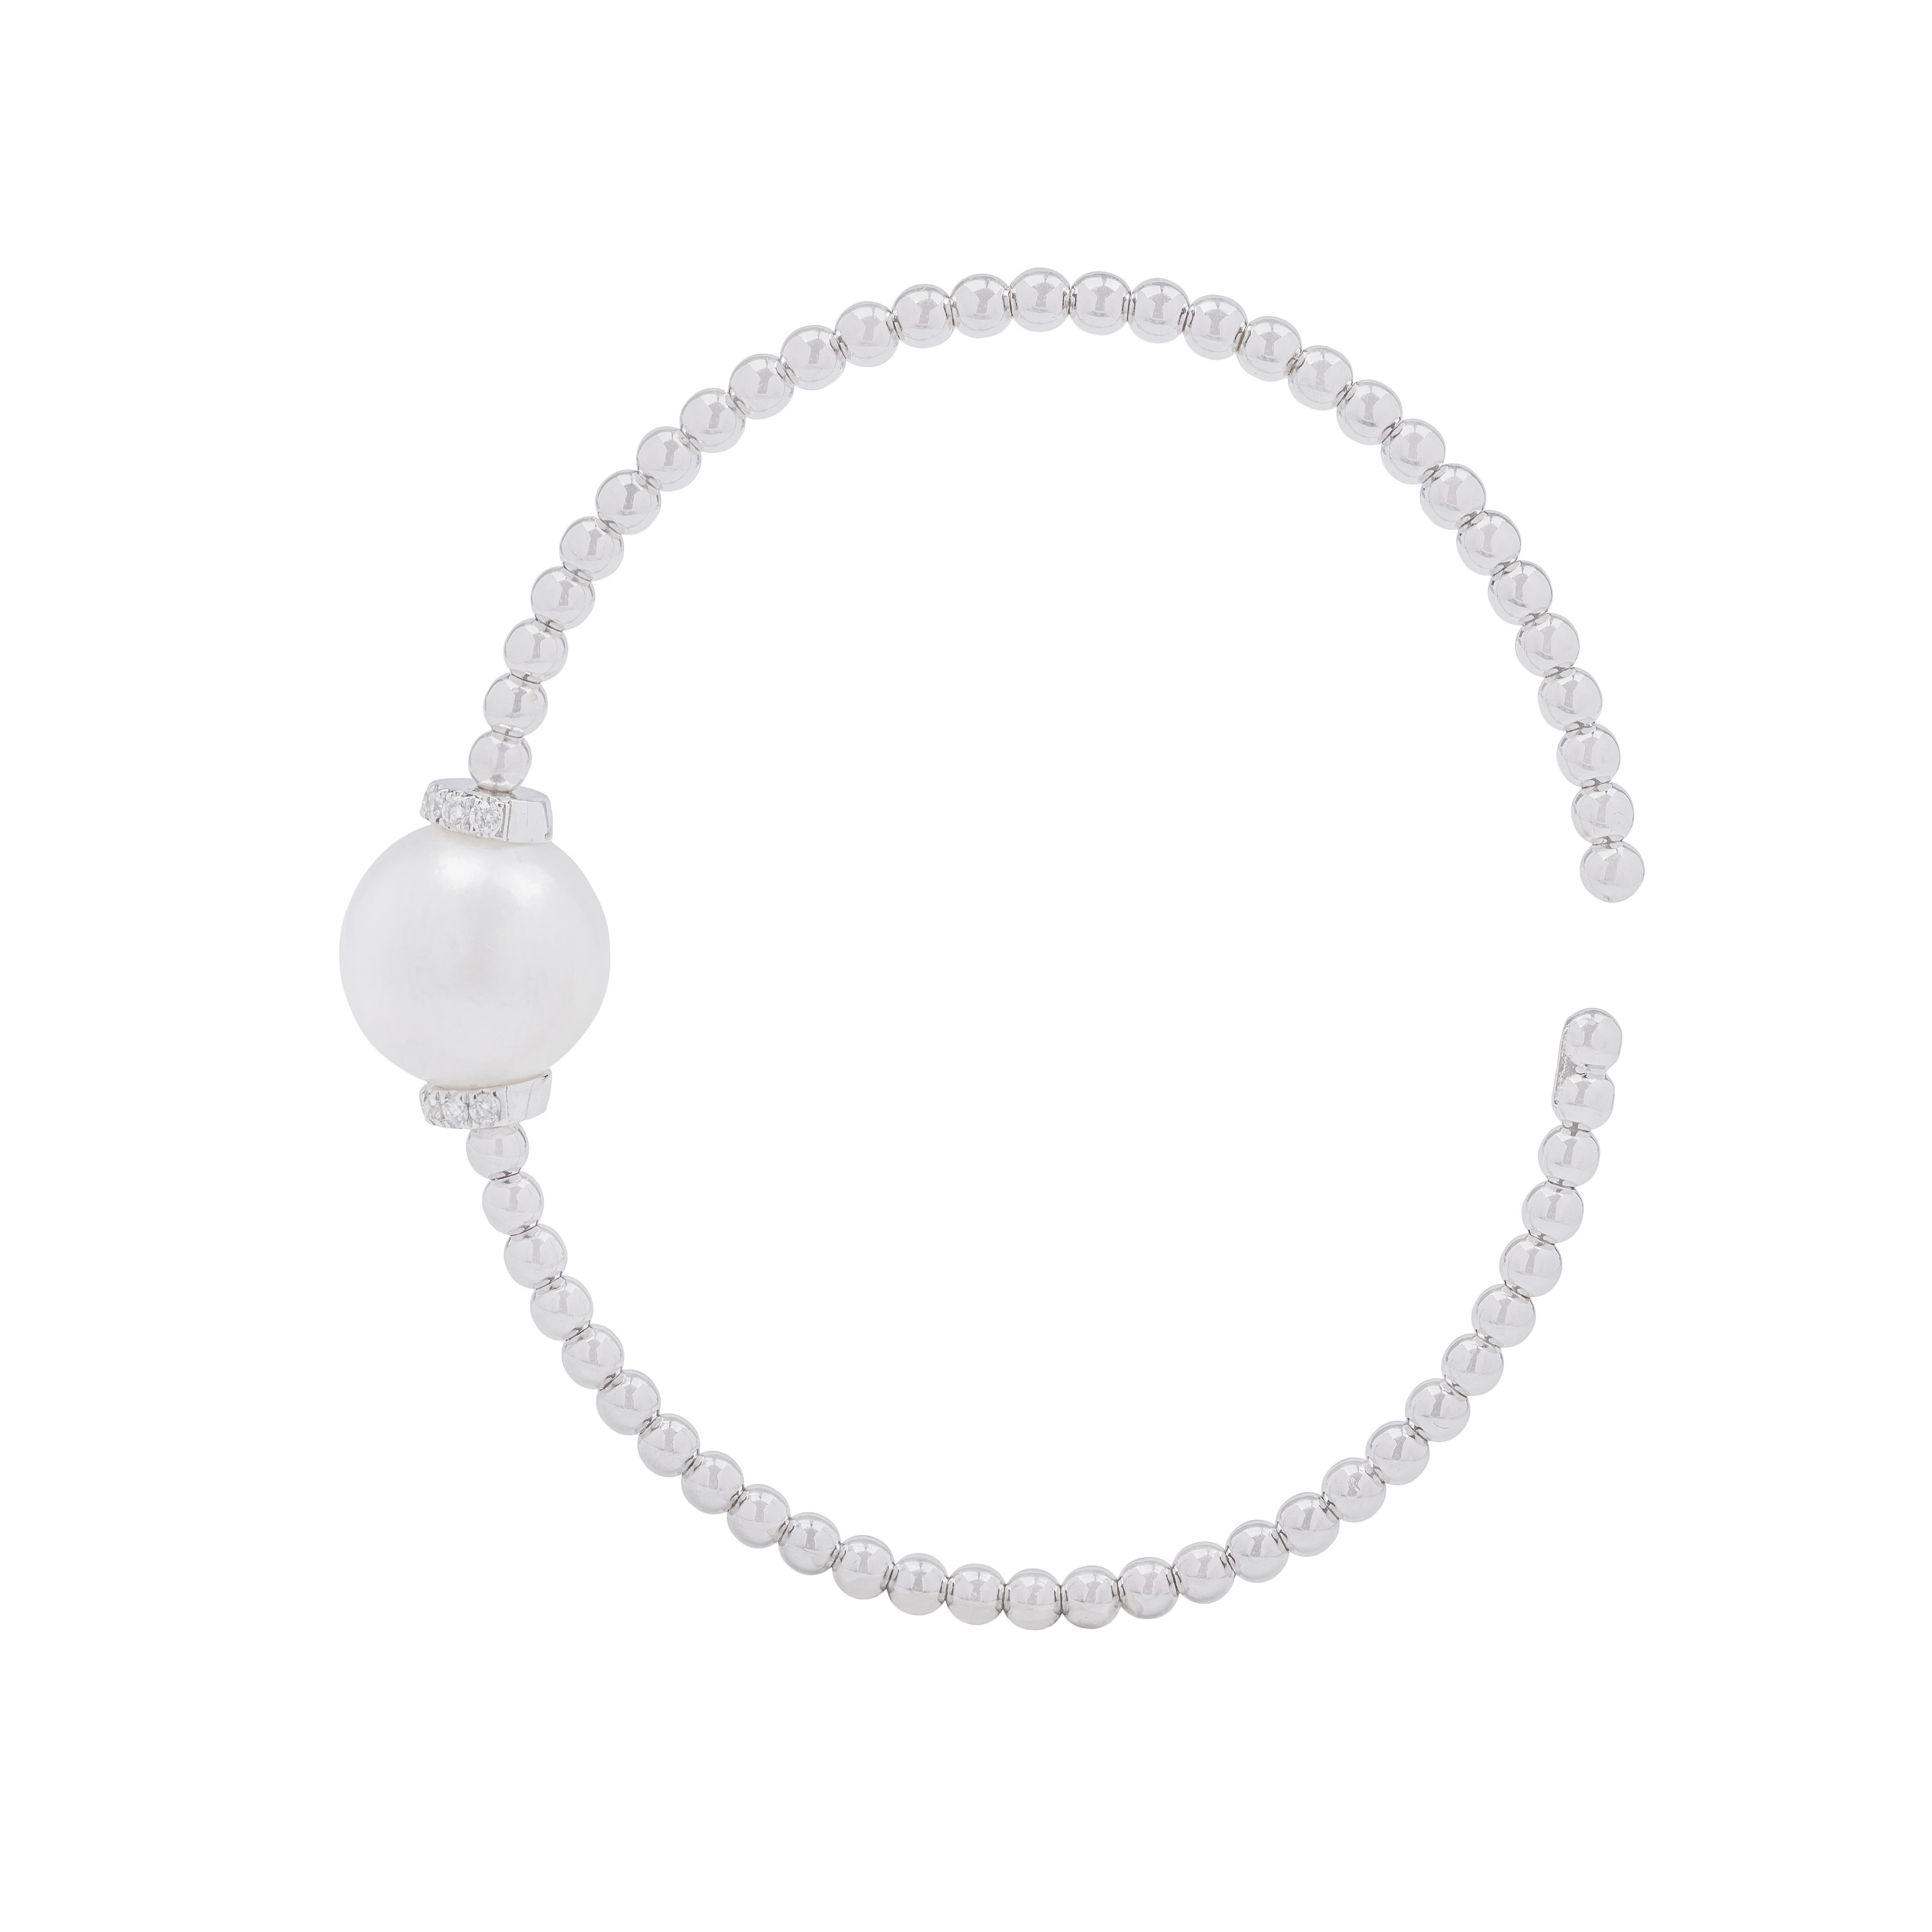 This bracelet is made in Italy by Coscia.
The frame is 18k white gold and it features a pearl at the centre with a ring of white diamonds at both sides of it. The bracelet consists of 58 18k white gold spheres.

Diamonds total content is 0.2ct
18k